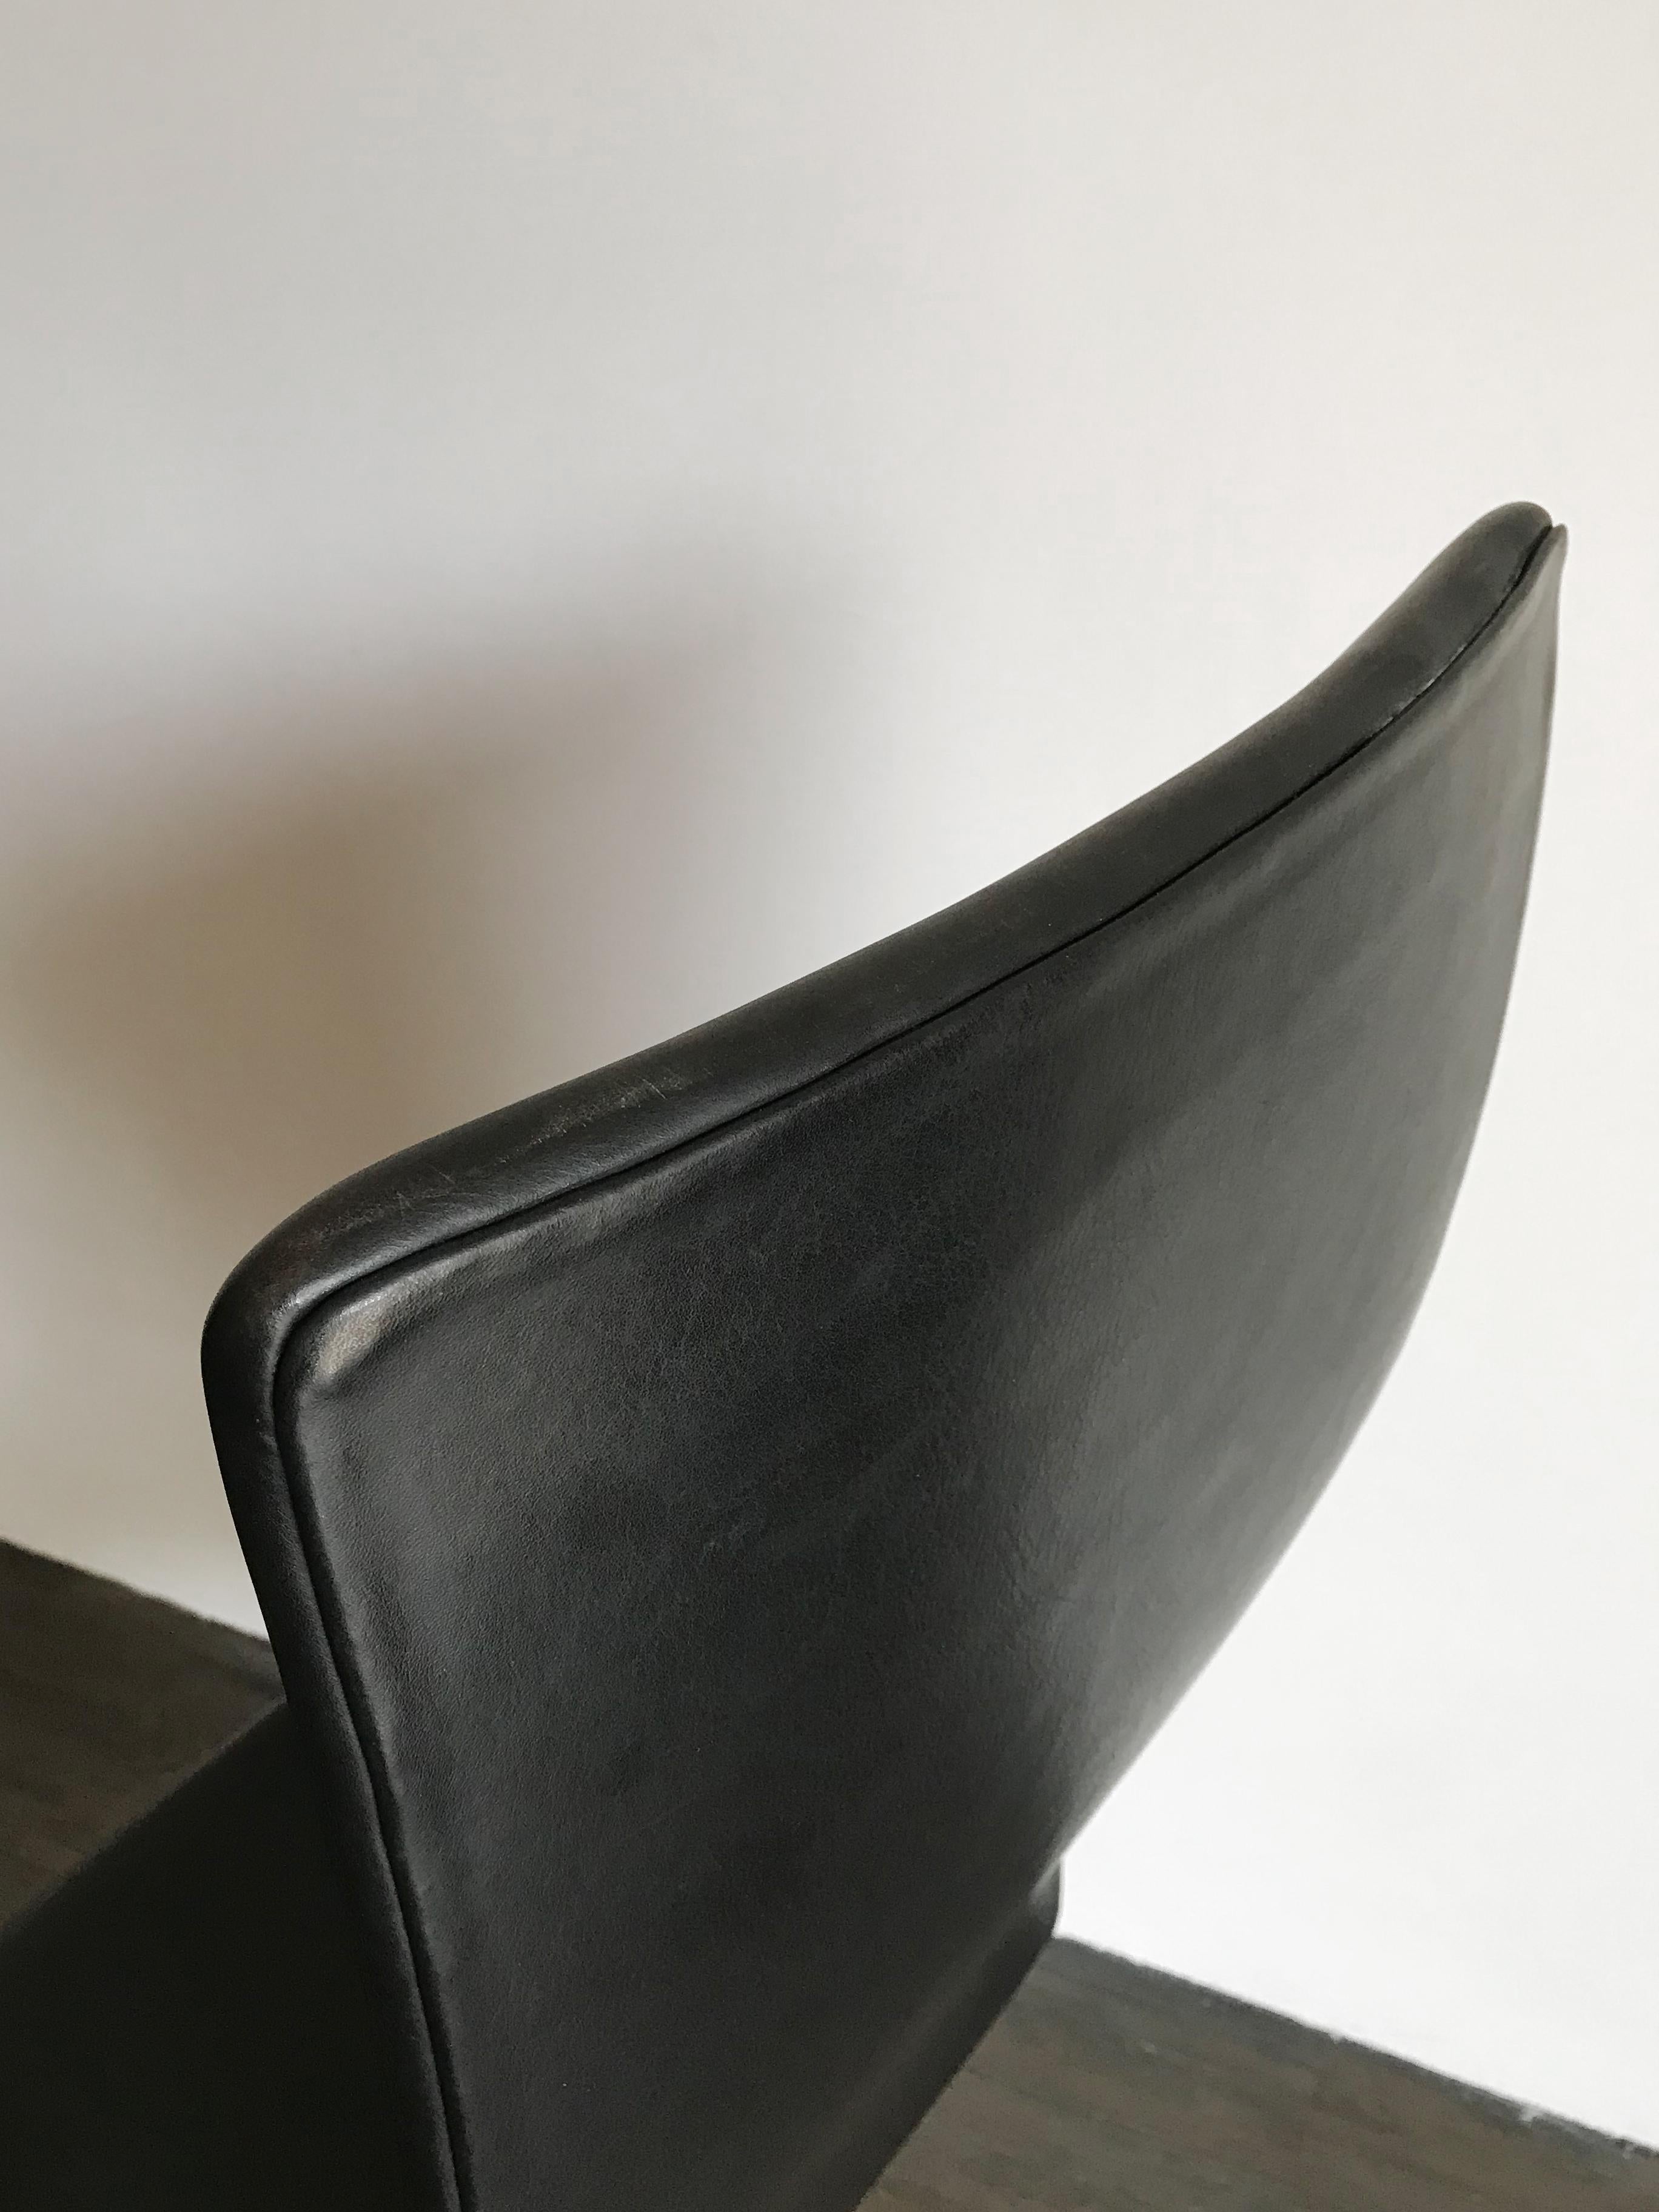 Oxford Midcentury Black Leather Chairs by Arne Jacobsen for Fritz Hansen, 1960s For Sale 3